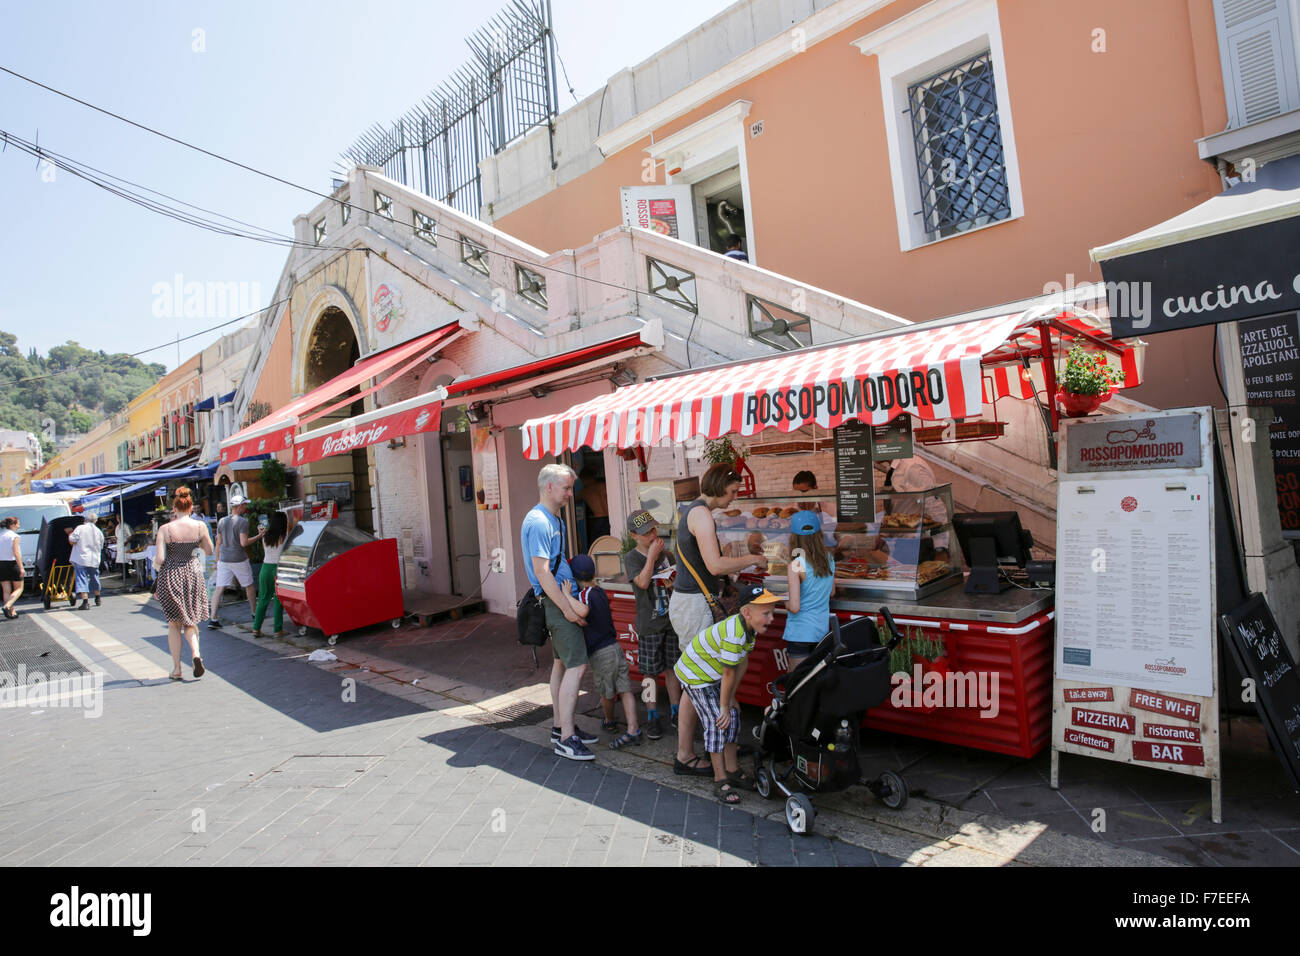 food vendors in a street market in the historic city centre, Nice, France Stock Photo